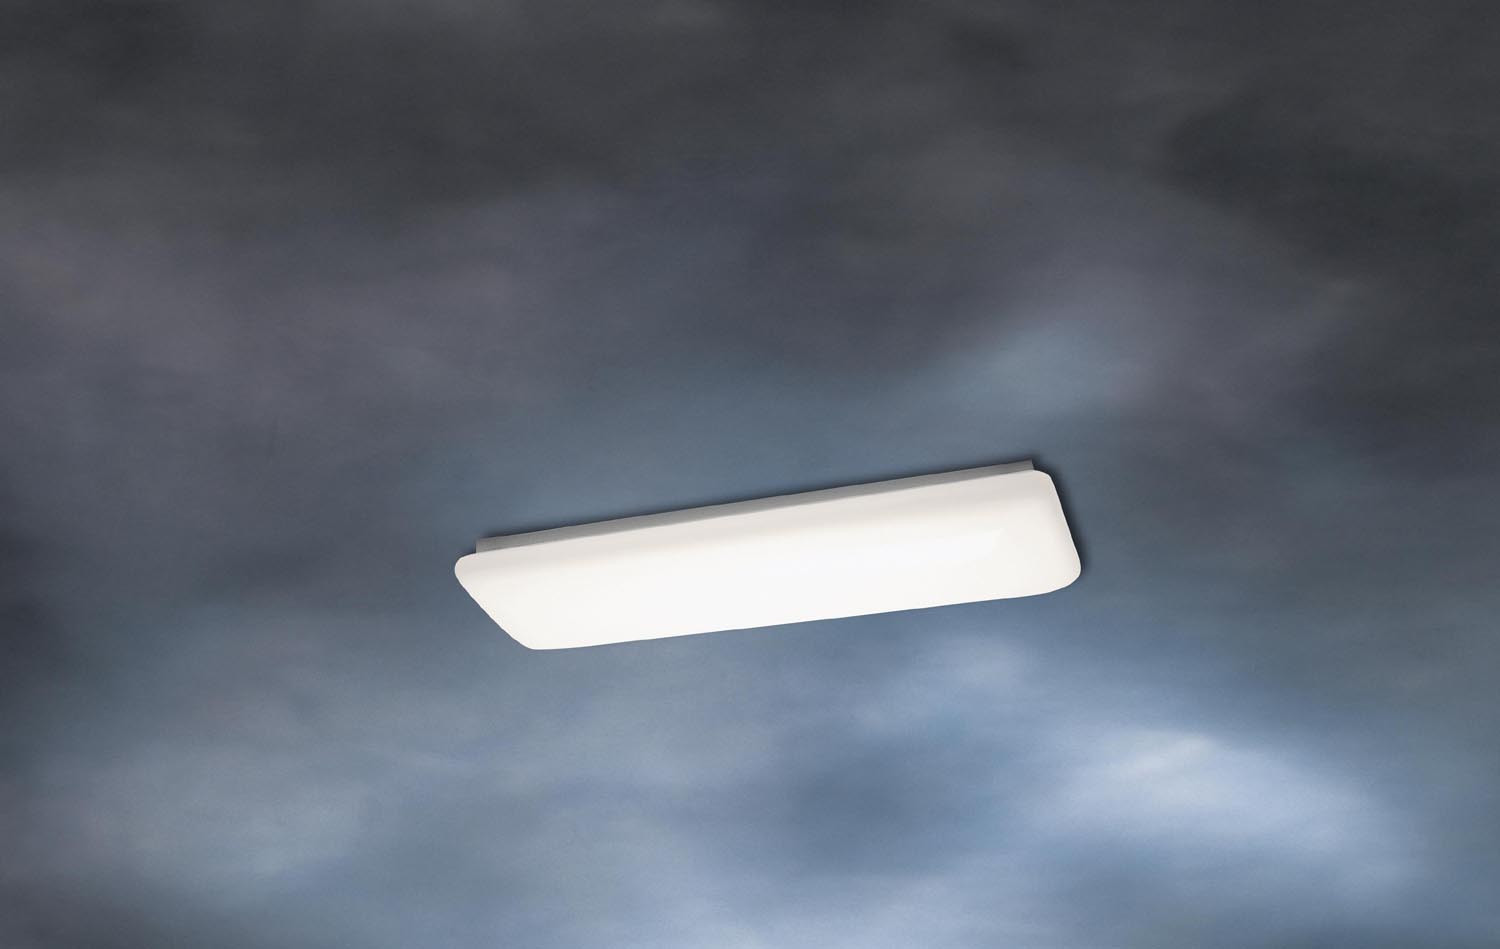 Free Shipping. Comes in White finish. #lighting